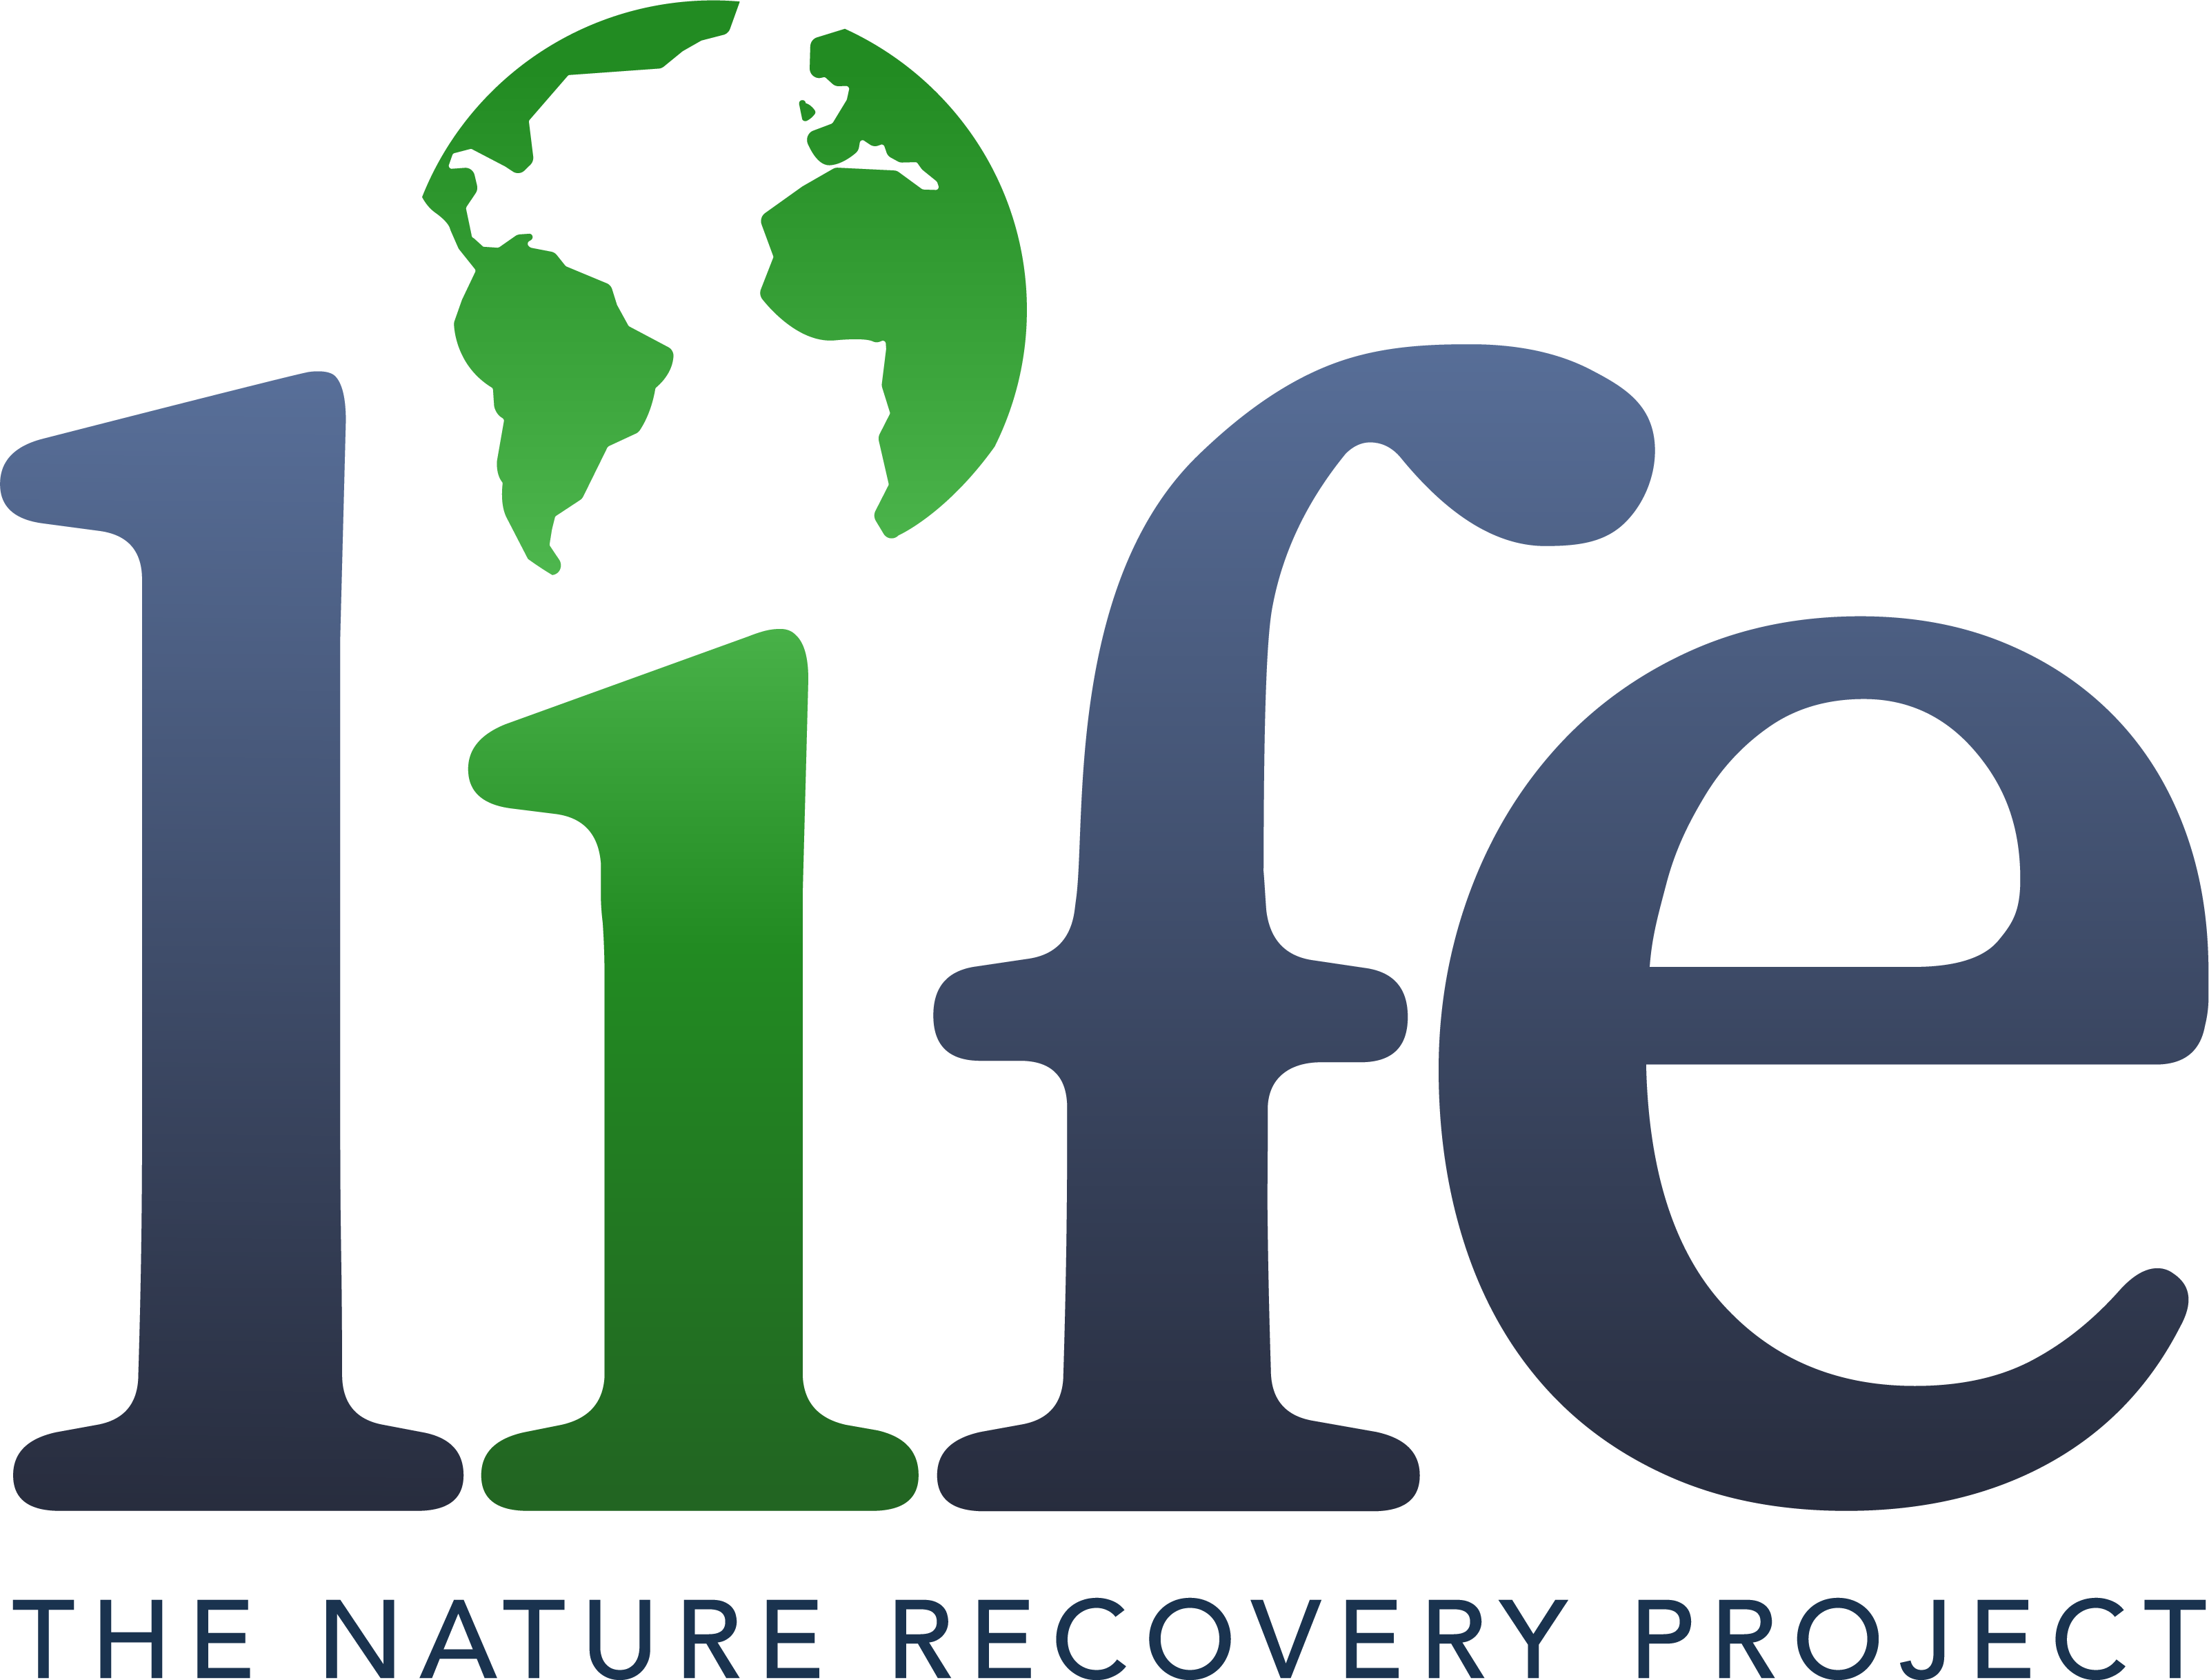 The Nature Recovery Project